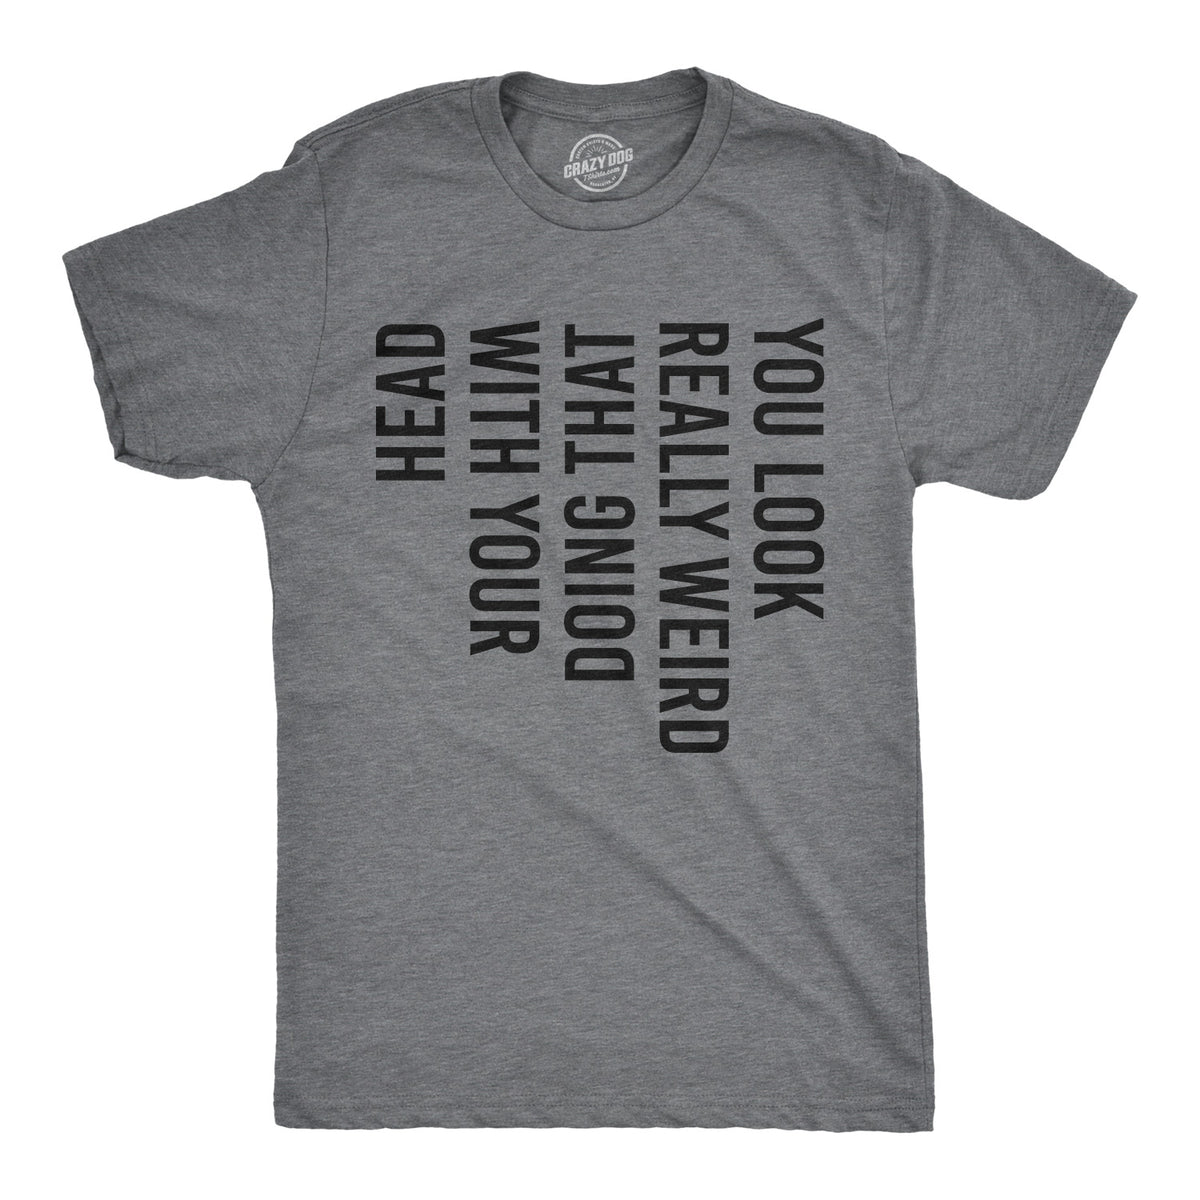 Funny Dark Heather Grey You Look Really Weird Doing That With Your Head Mens T Shirt Nerdy Tee